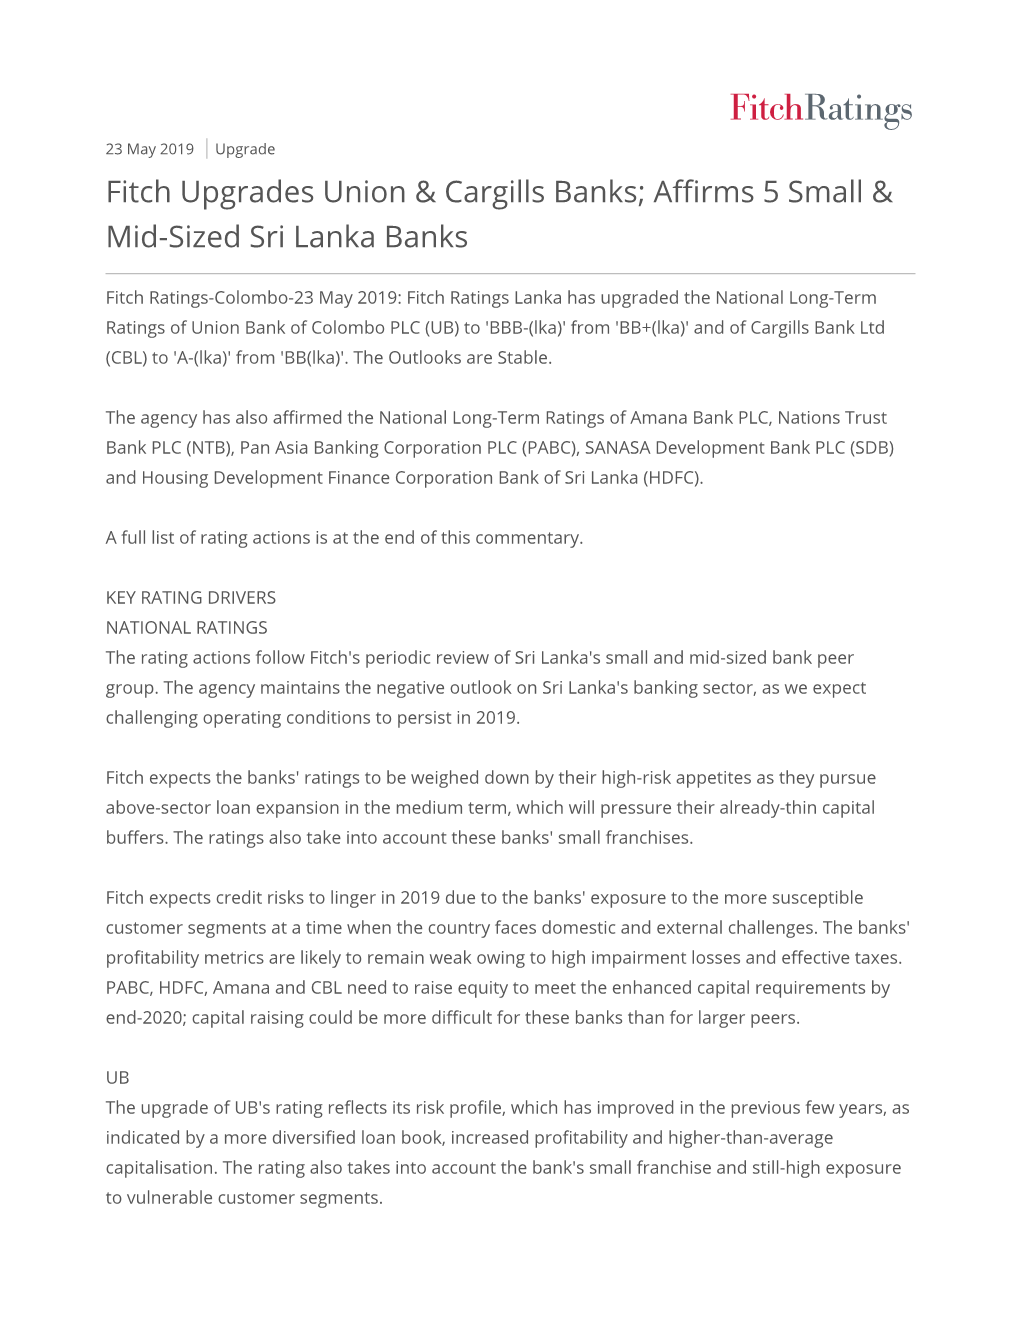 Fitch Upgrades Union & Cargills Banks; Affirms 5 Small & Mid-Sized